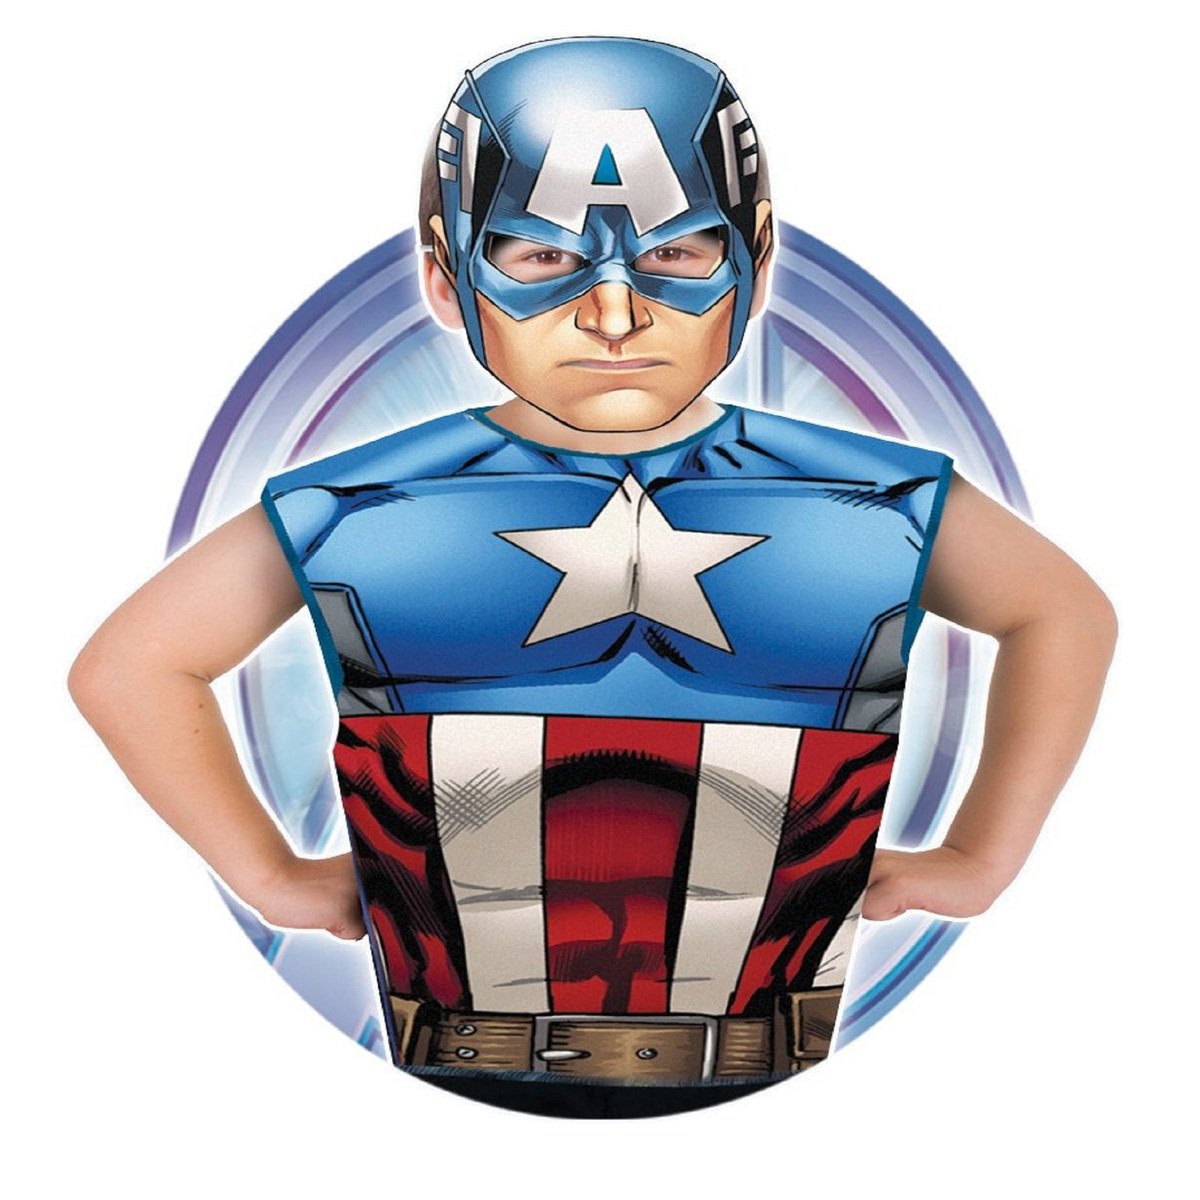 Avengers Captian America Party Costume 620969 Size 3-6Y